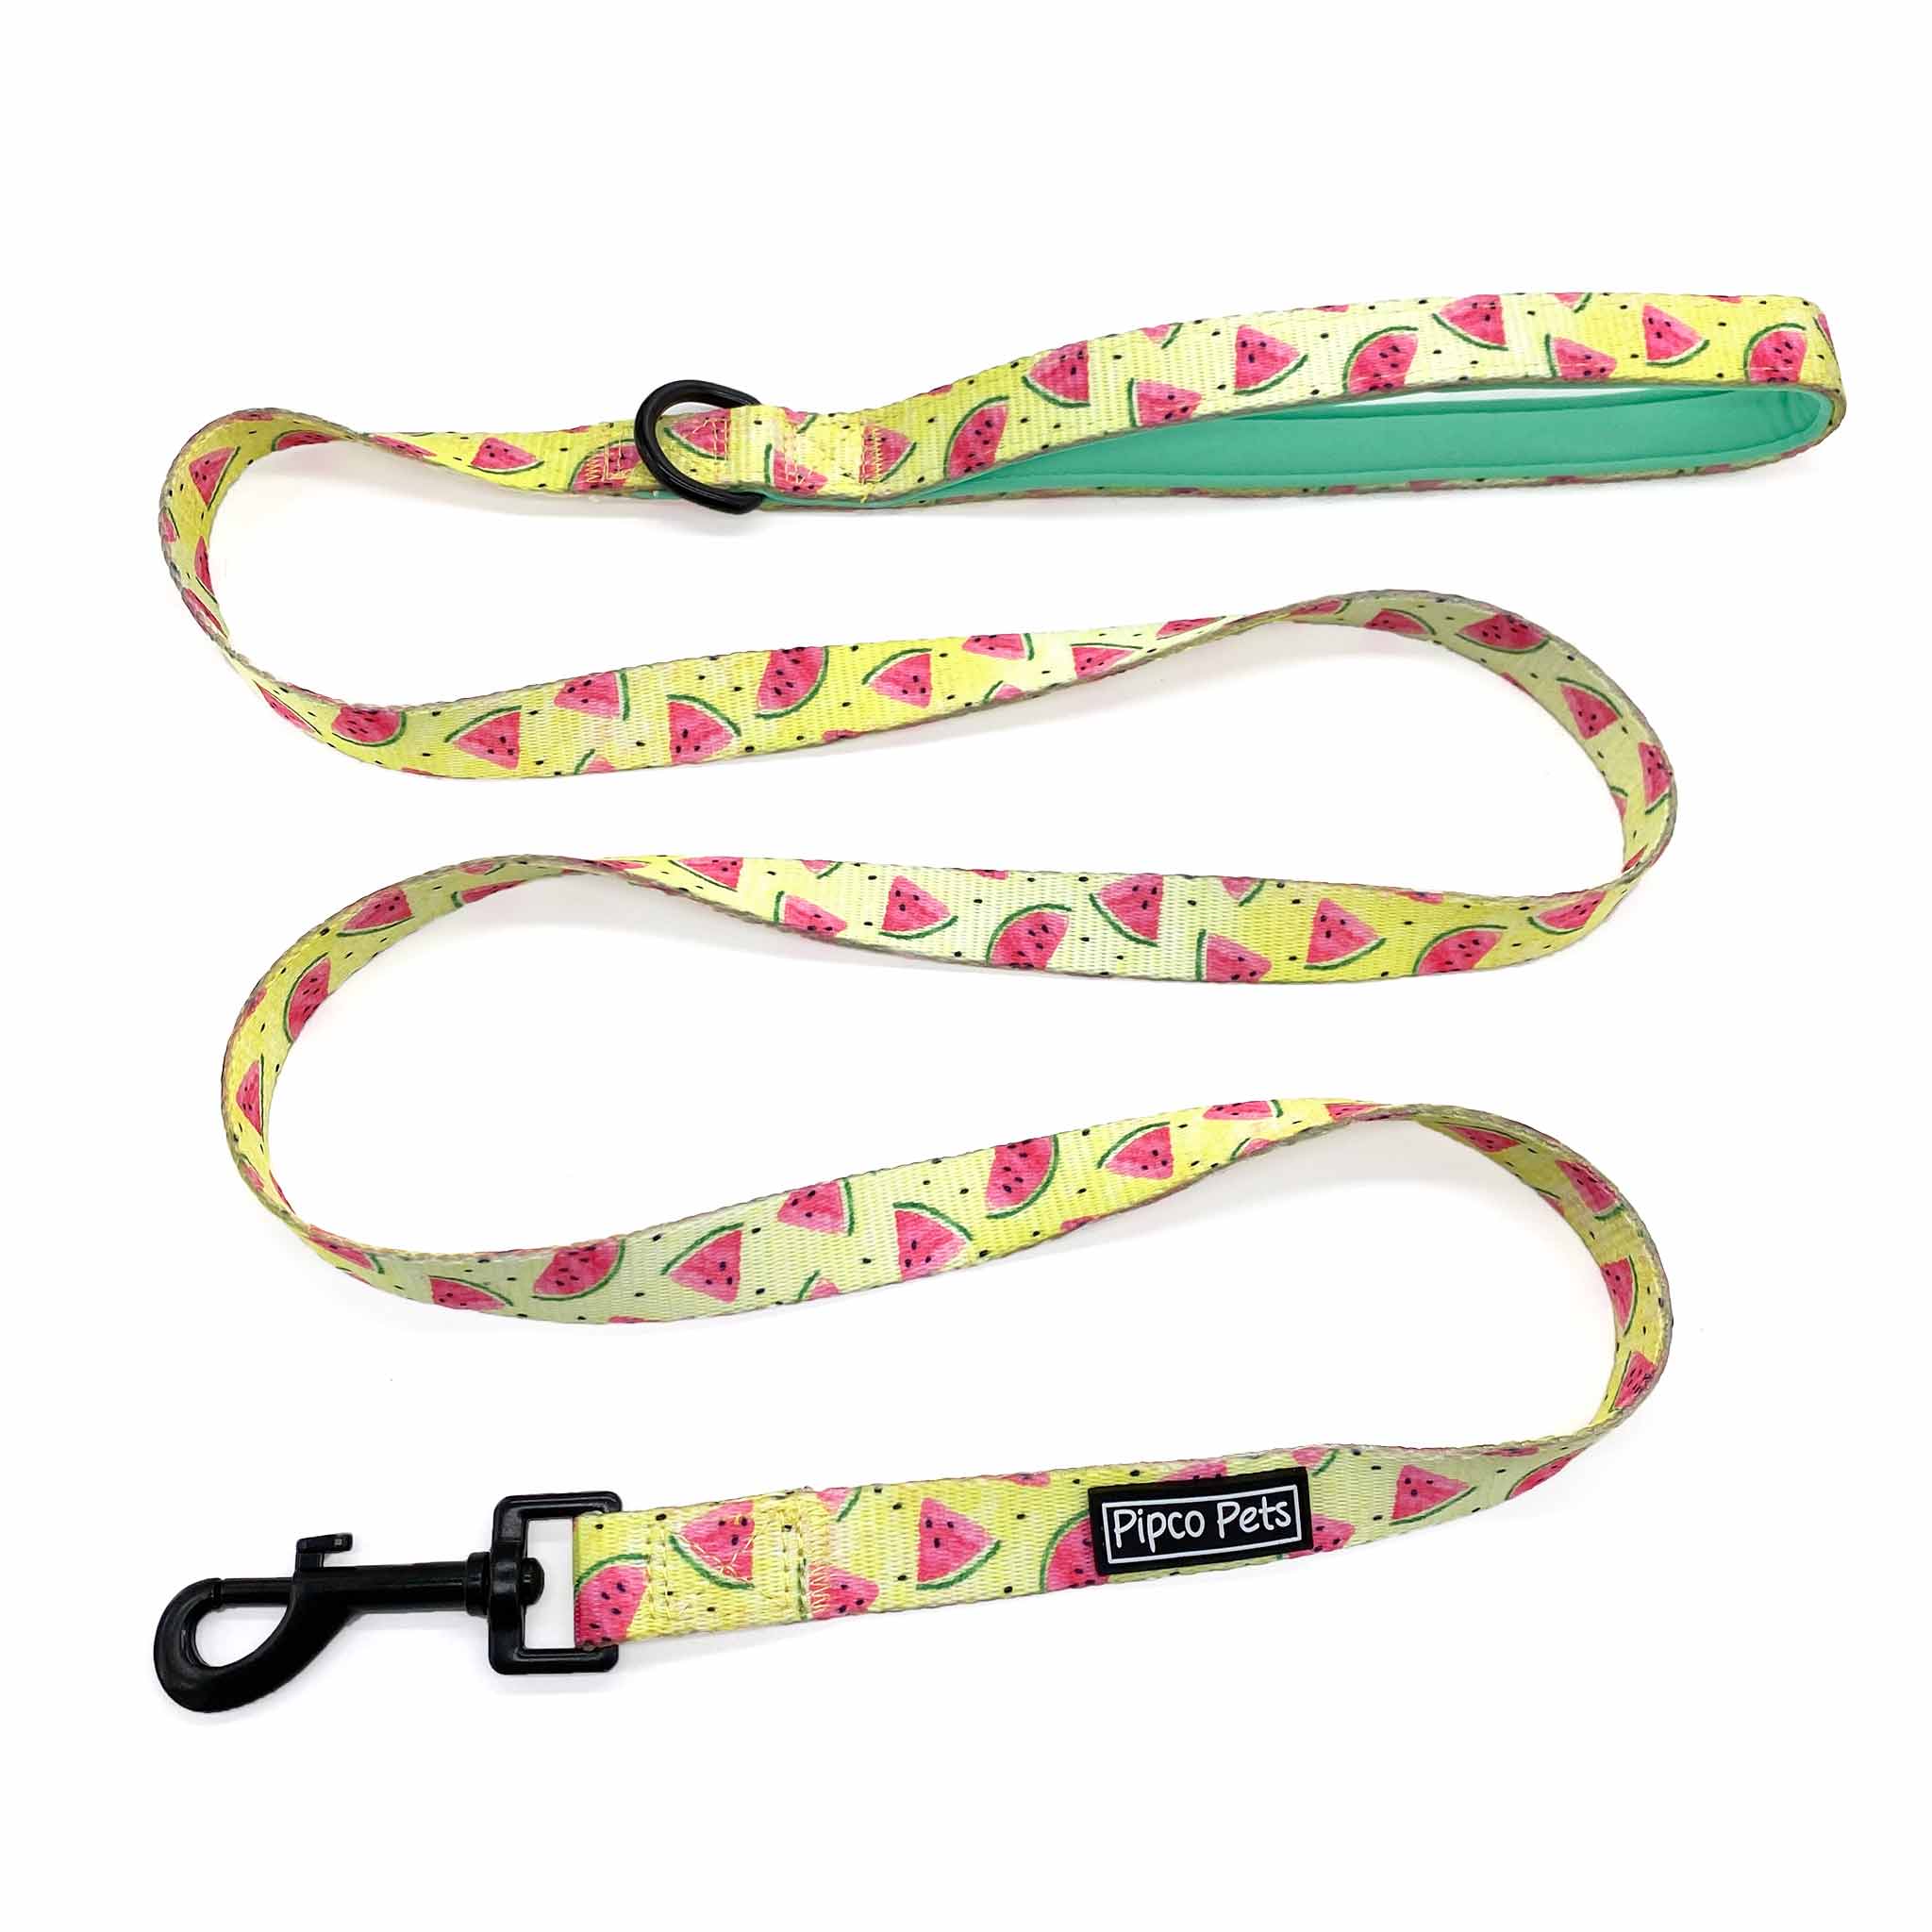 Pipco Pets dog leash with Summer Melons watermelon print pattern in yellow